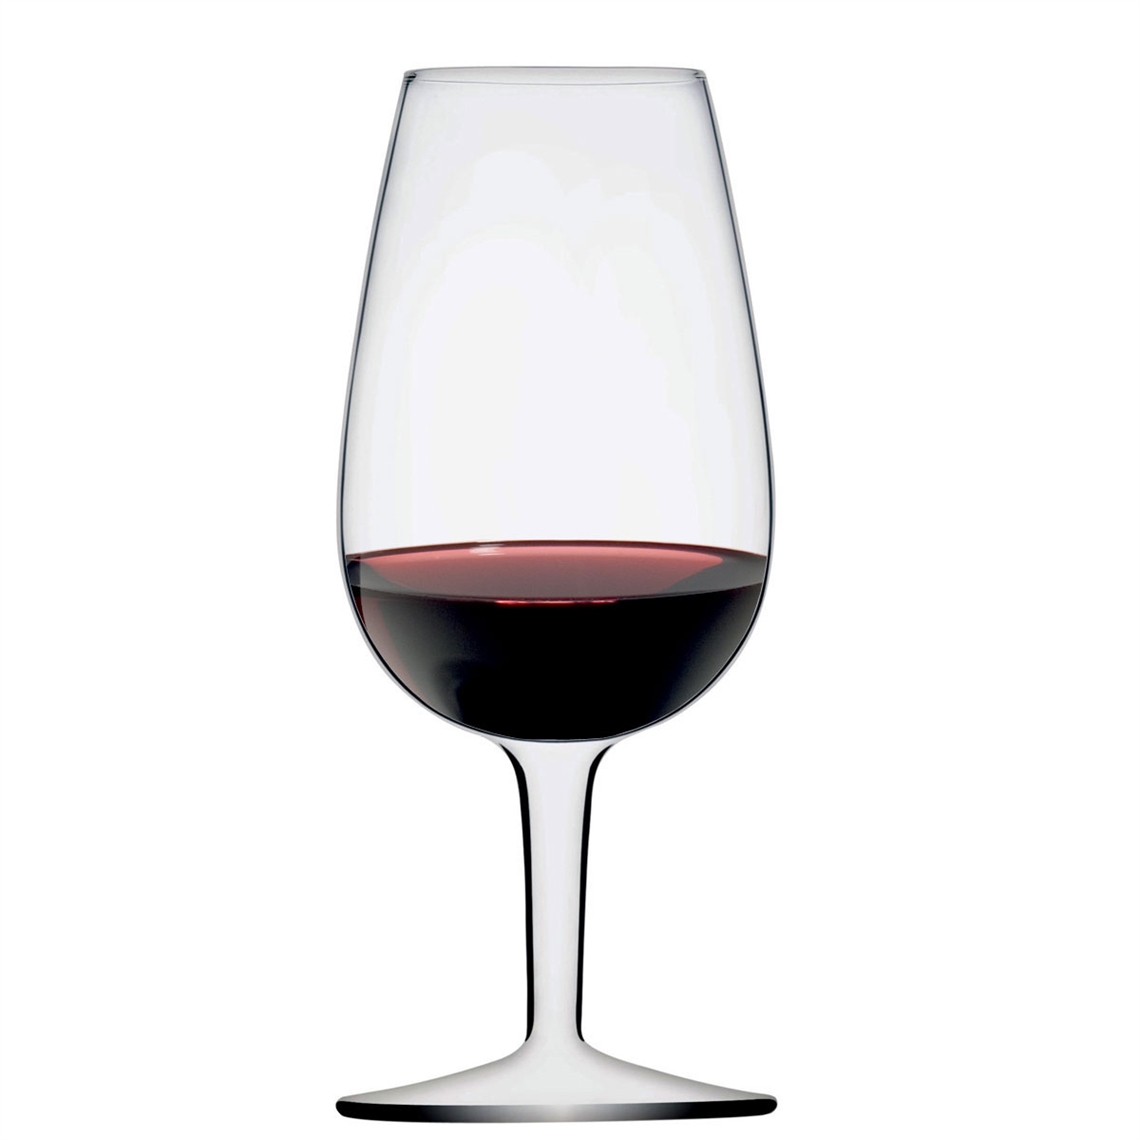 View more rioja wine glasses from our Wine Tasting Glasses range